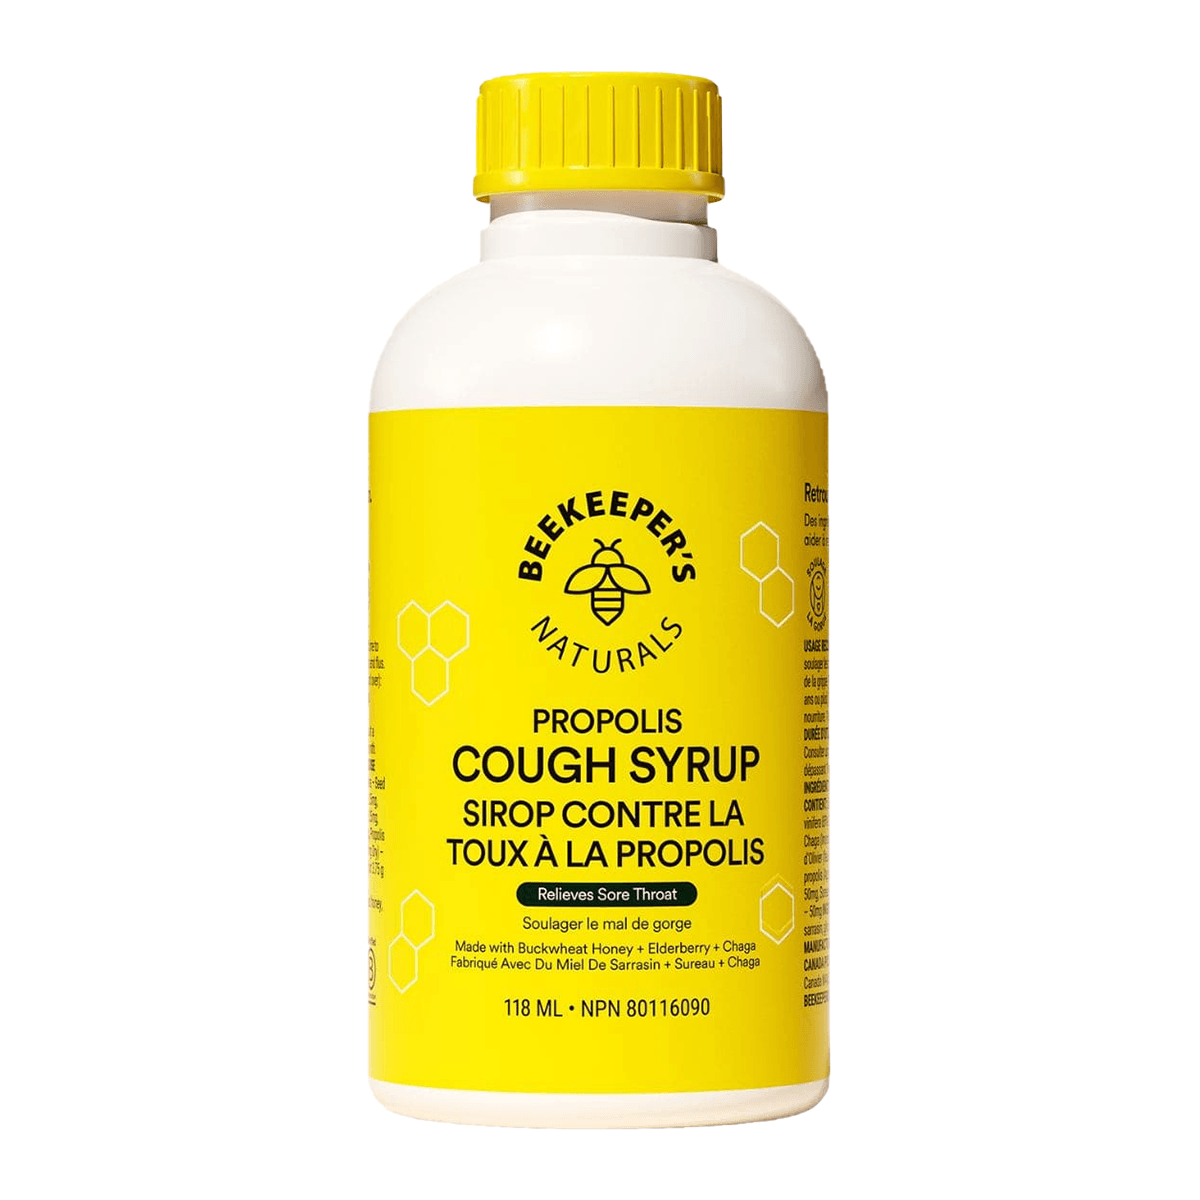 Beekeeper's Naturals Propolis Cough Syrup Day Time 118mL Cough, Cold & Flu at Village Vitamin Store